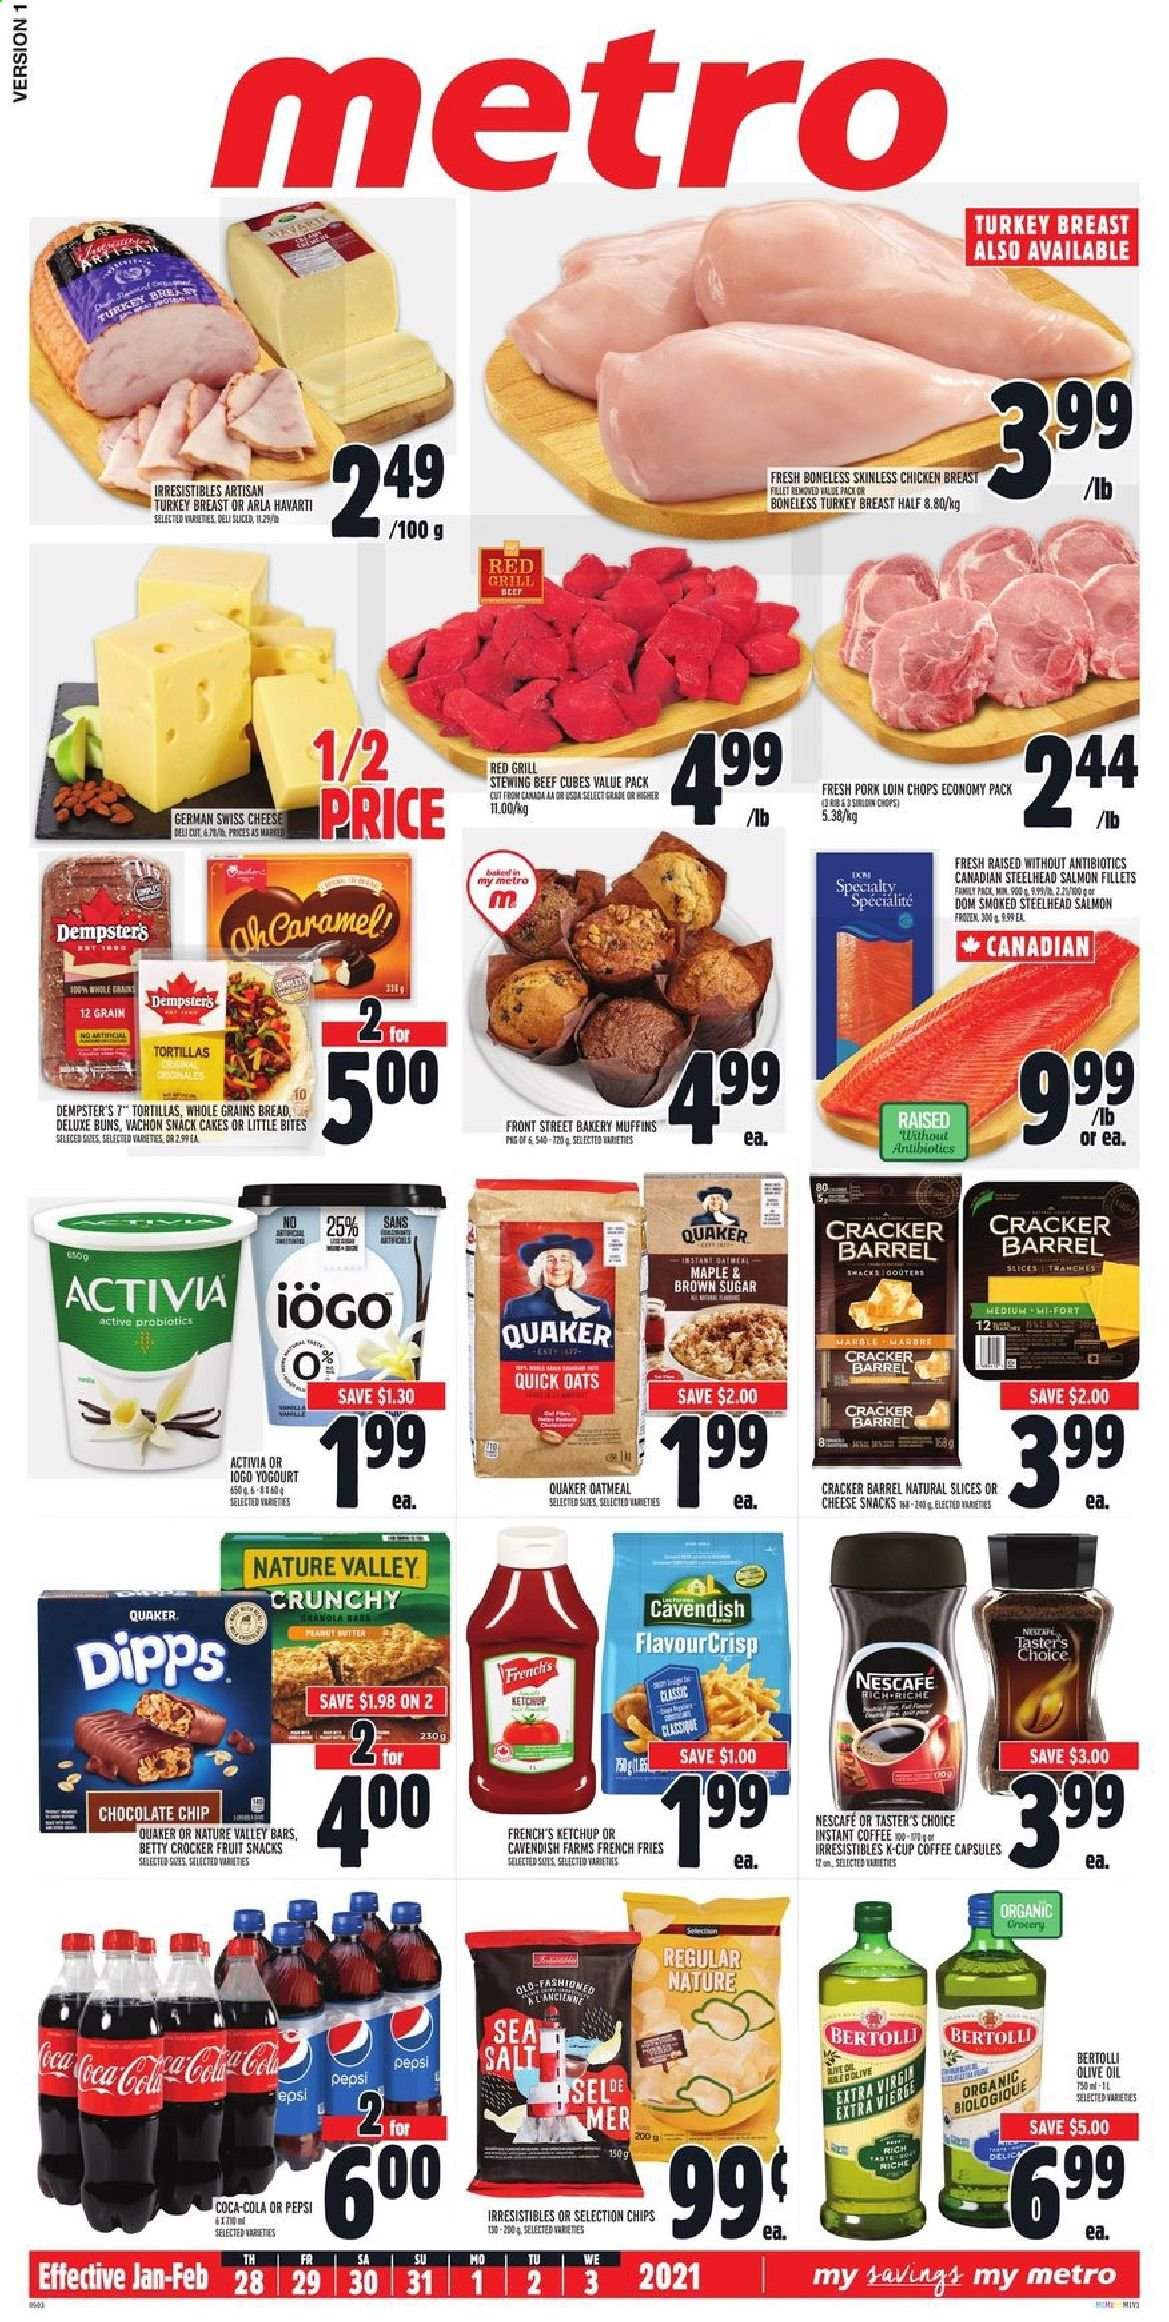 thumbnail - Metro Flyer - January 28, 2021 - February 03, 2021 - Sales products - tortillas, cake, buns, muffin, salmon, salmon fillet, Quaker, Bertolli, swiss cheese, Havarti, Arla, Activia, potato fries, french fries, snack, crackers, Little Bites, oatmeal, oats, Quick Oats, Nature Valley, olive oil, oil, Coca-Cola, Pepsi, instant coffee, coffee capsules, K-Cups, turkey breast, chicken breasts, chicken, turkey, beef meat, stewing beef, pork chops, pork loin, pork meat, marker, probiotics, chips, Nescafé. Page 1.